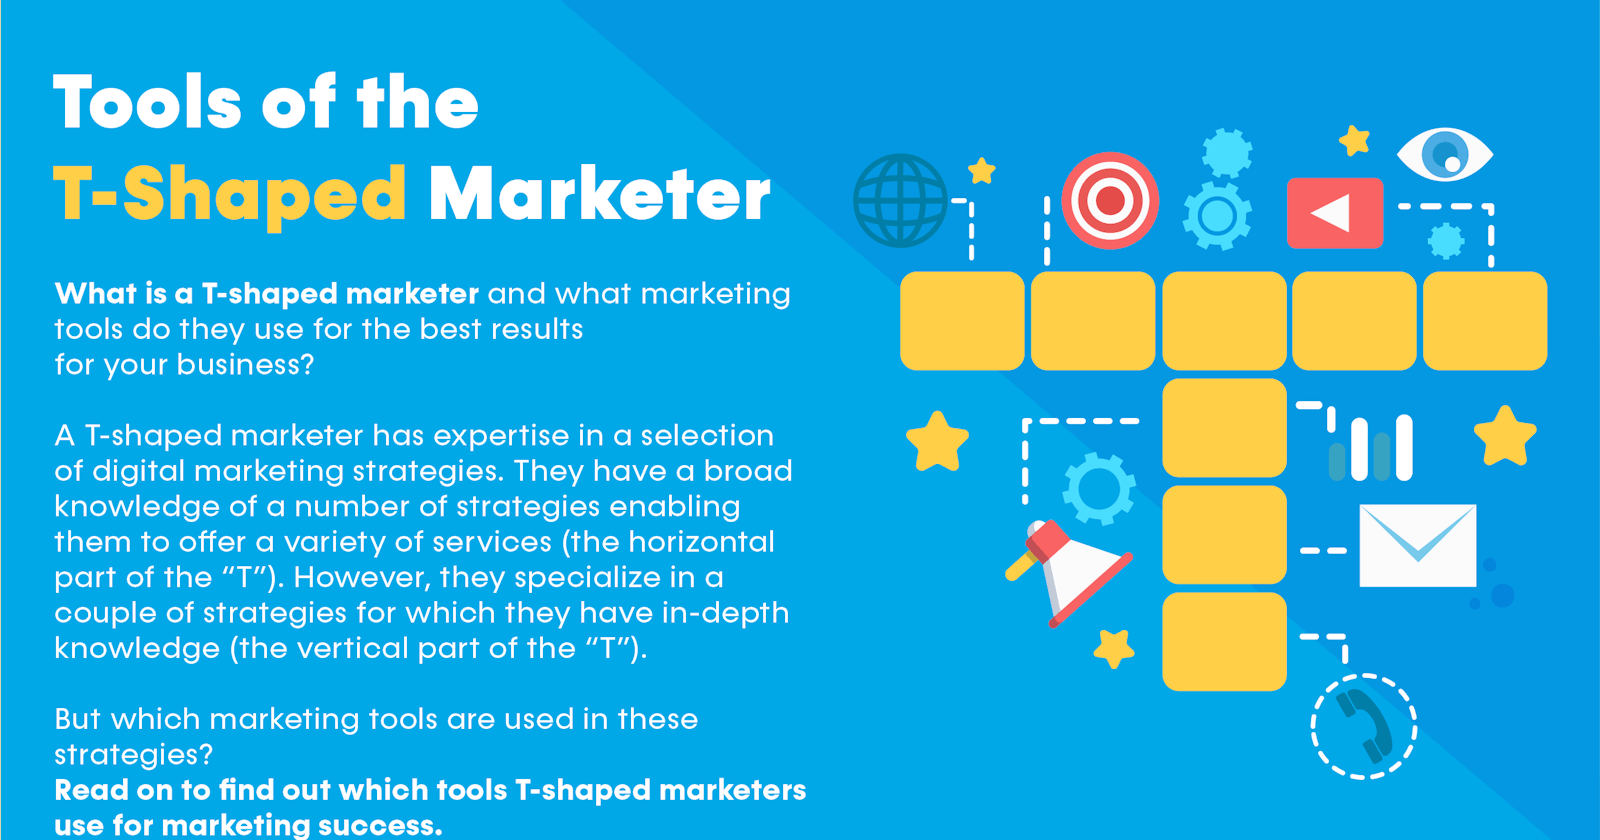 Tools of the T-Shaped Marketer